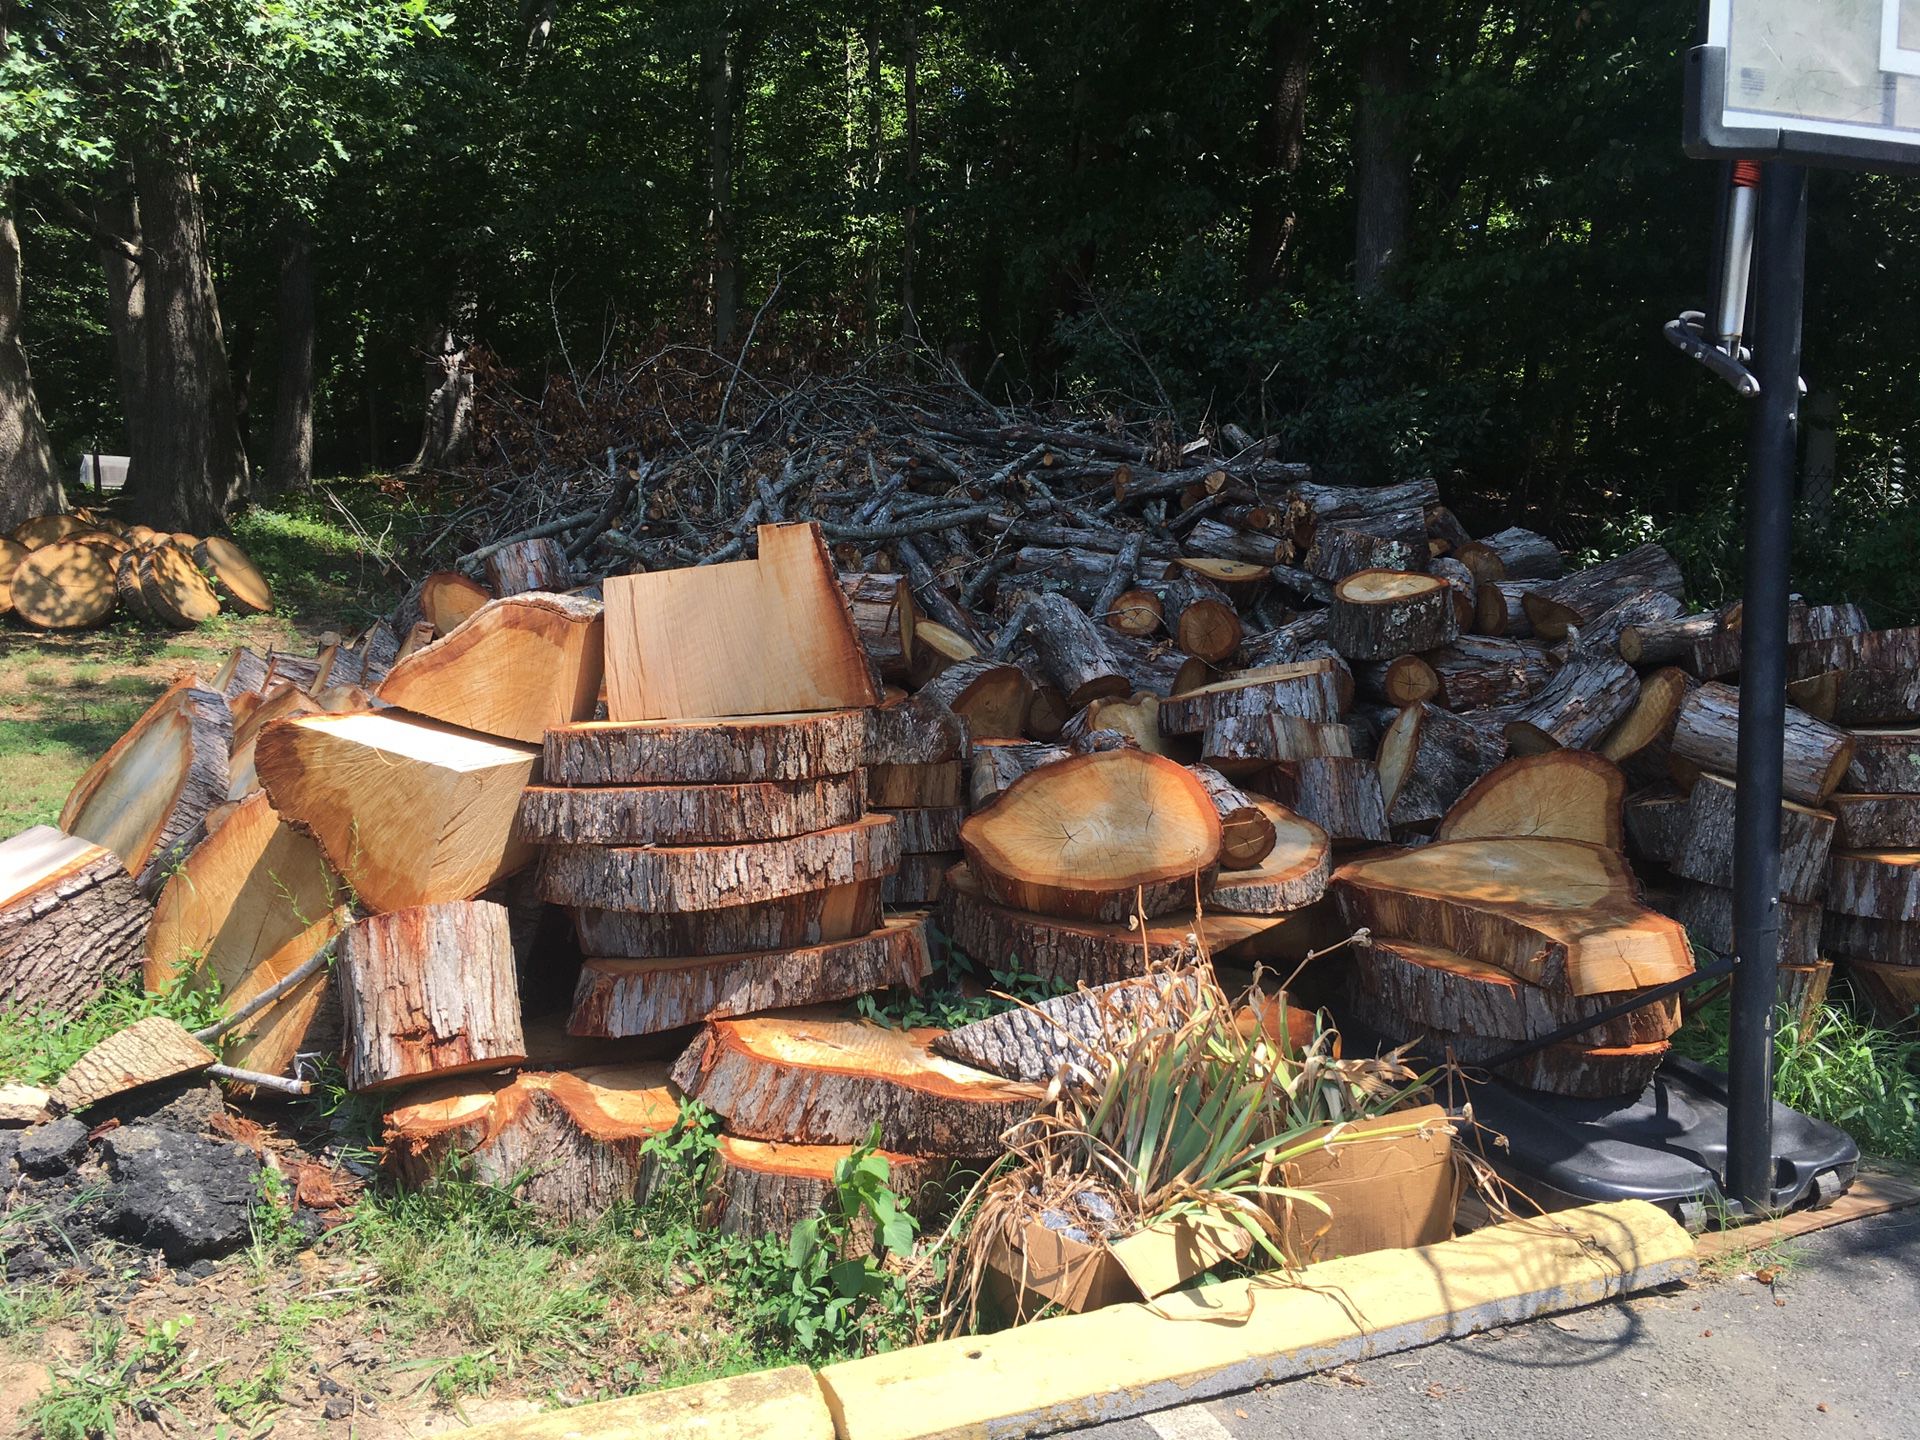 FREE Oak Wood! Firewood or projects - you pick up!